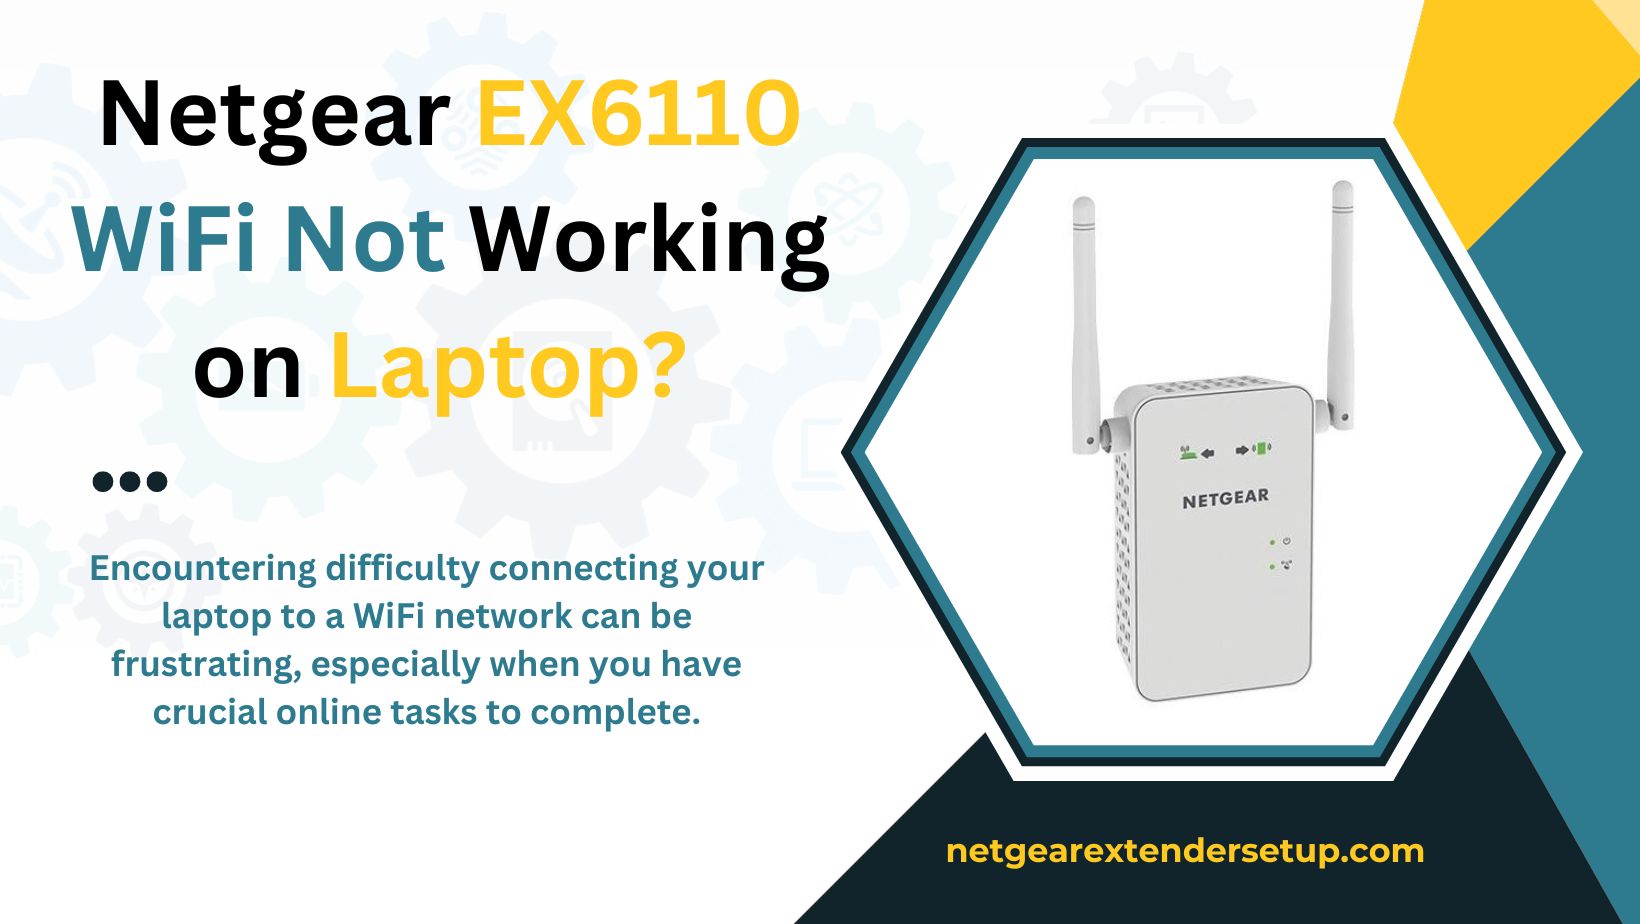 You are currently viewing Netgear EX6110 WiFi Not Working on Laptop? Here’s the solution